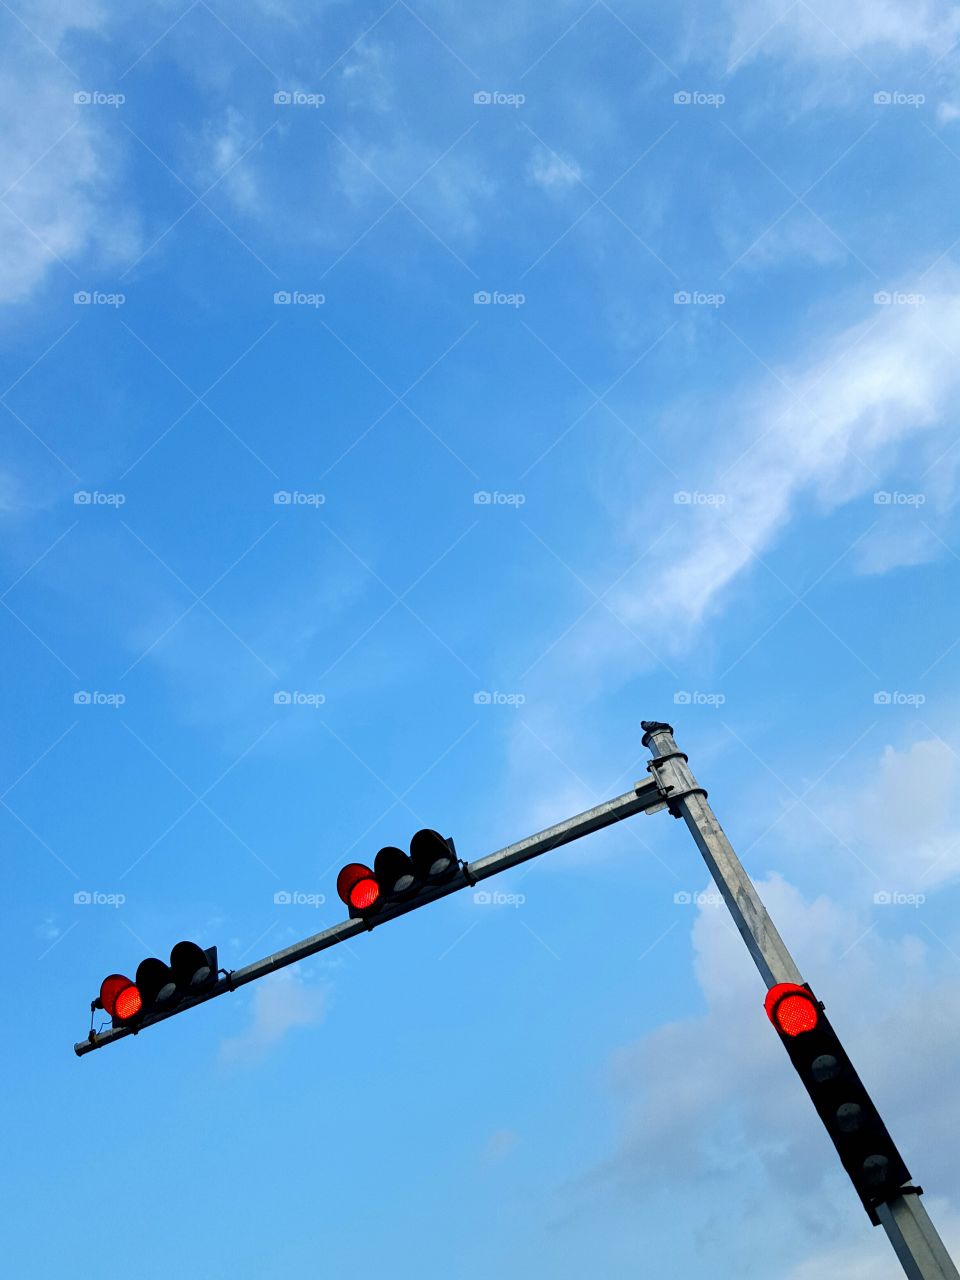 A look up Minimalist photo of Street red light with blue sky and clouds.